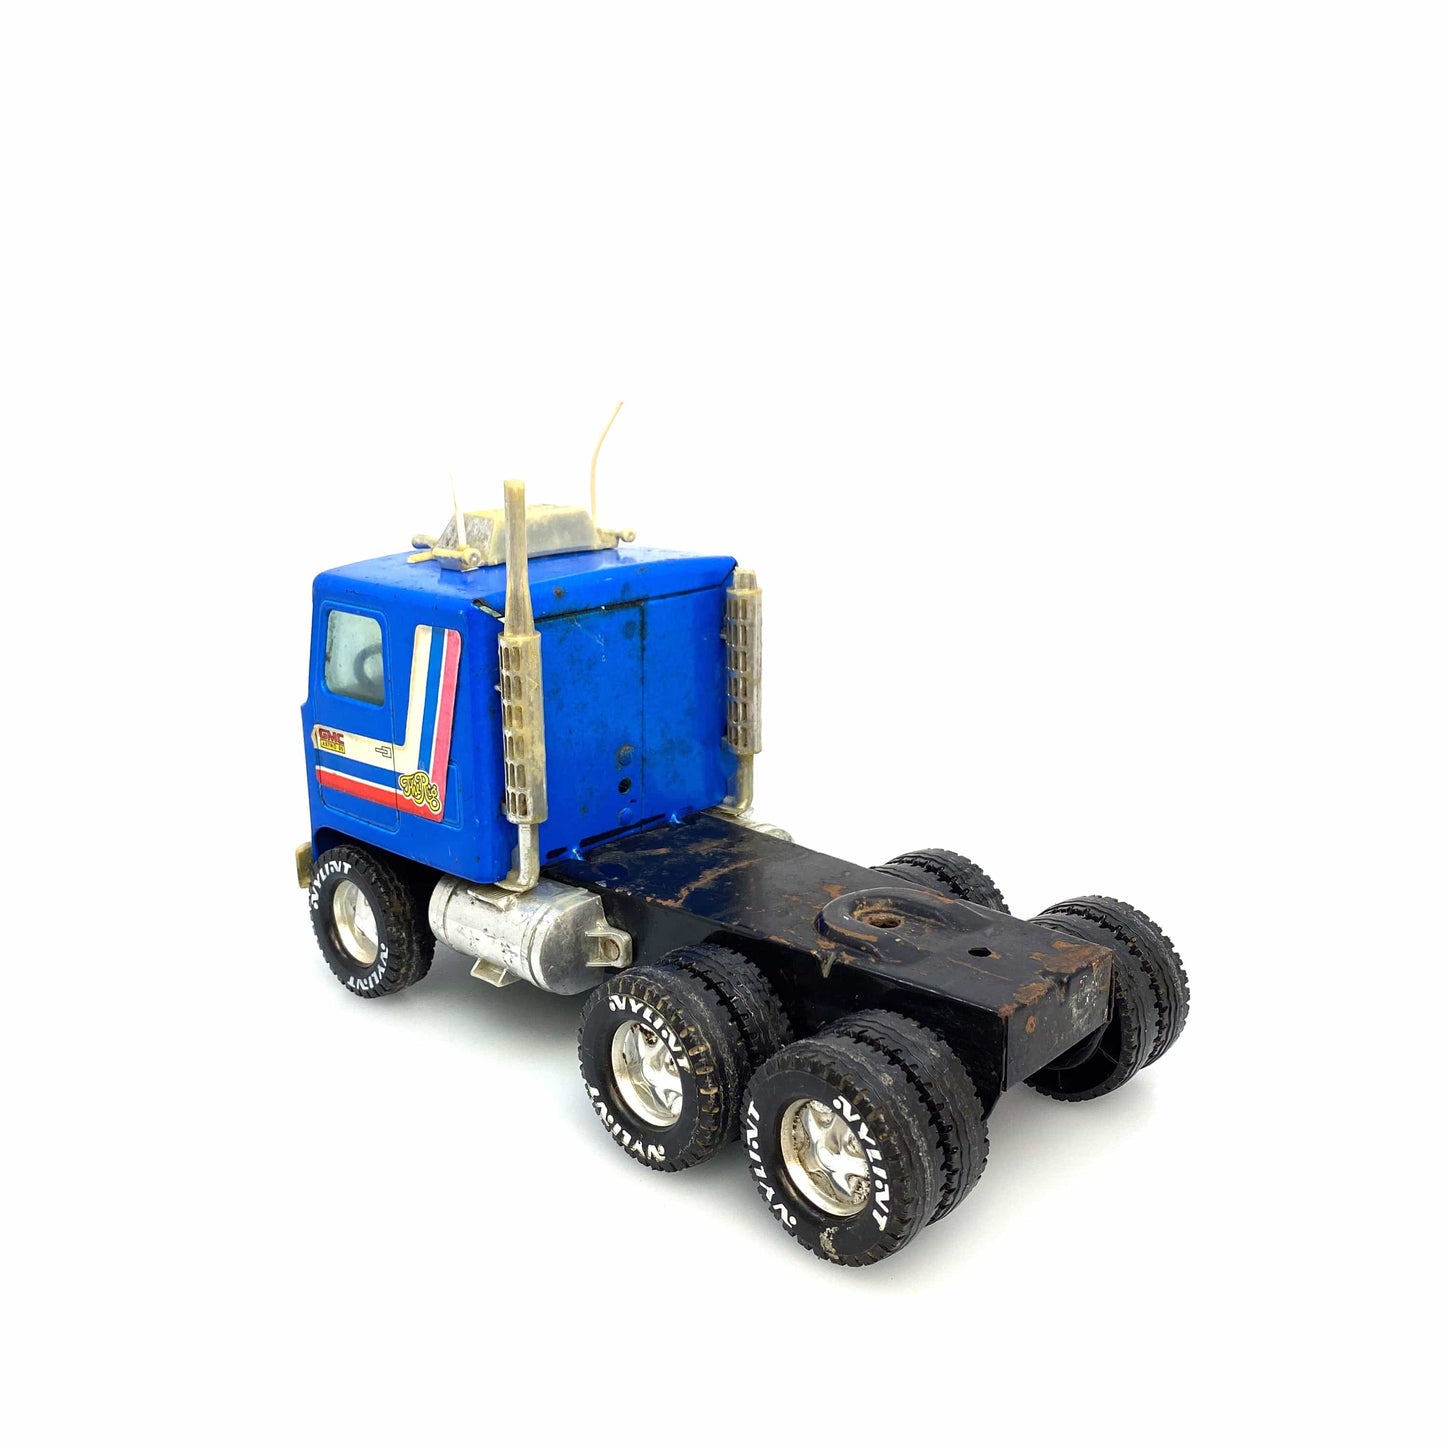 Vintage Nylint GMC Cab over Astro Tractor Trailer 18 Wheeler "The Rig" Semi Truck 22"